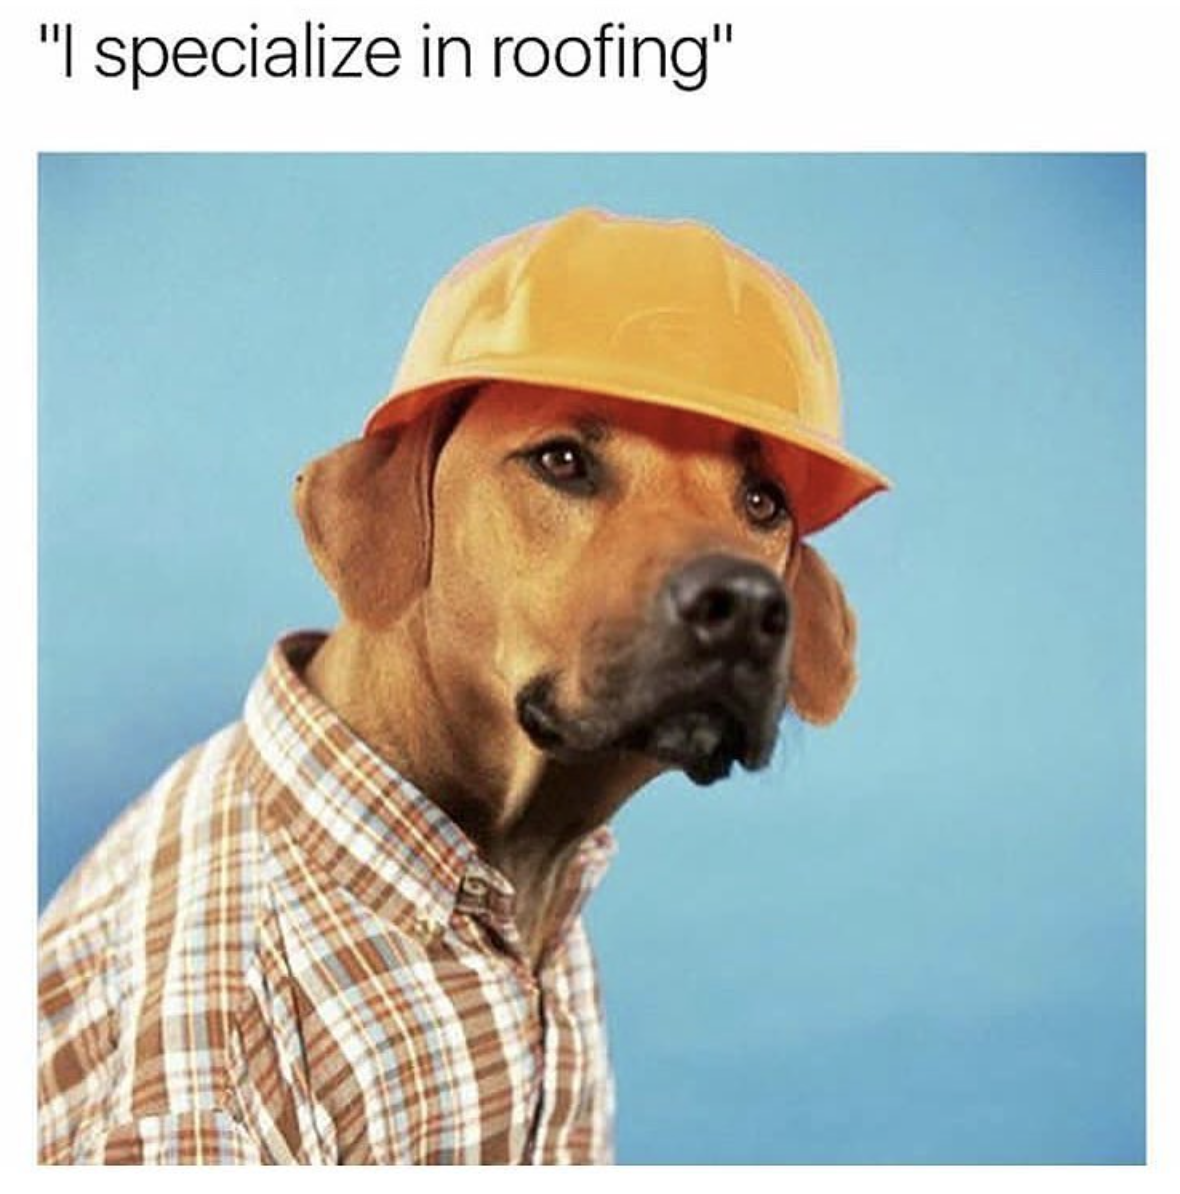 memes - my specialty is roofing - "I specialize in roofing"